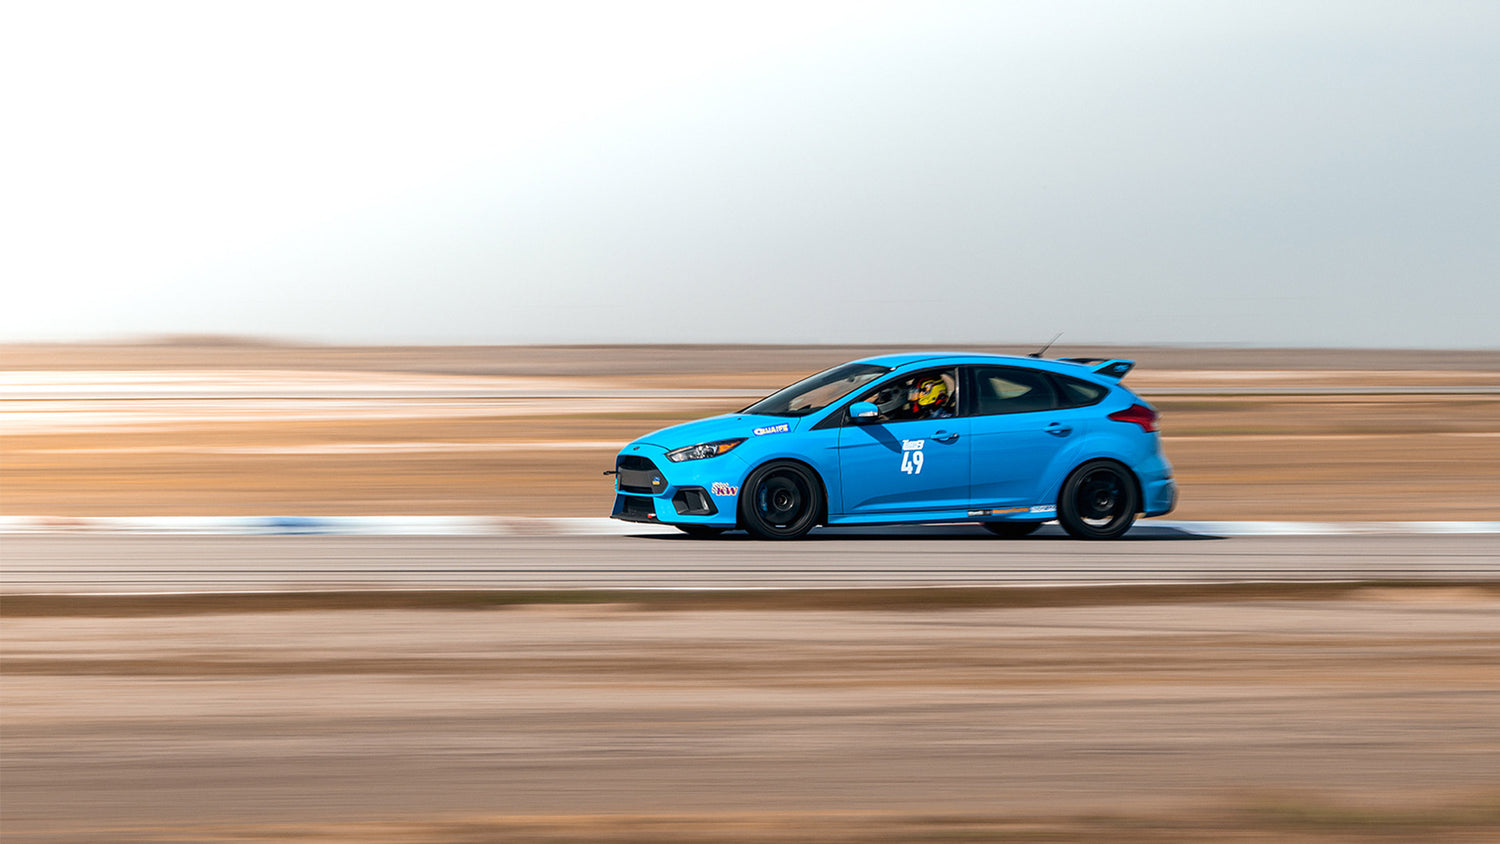 Ford Focus RS on our Super Touring Podiums Sets New Track Record